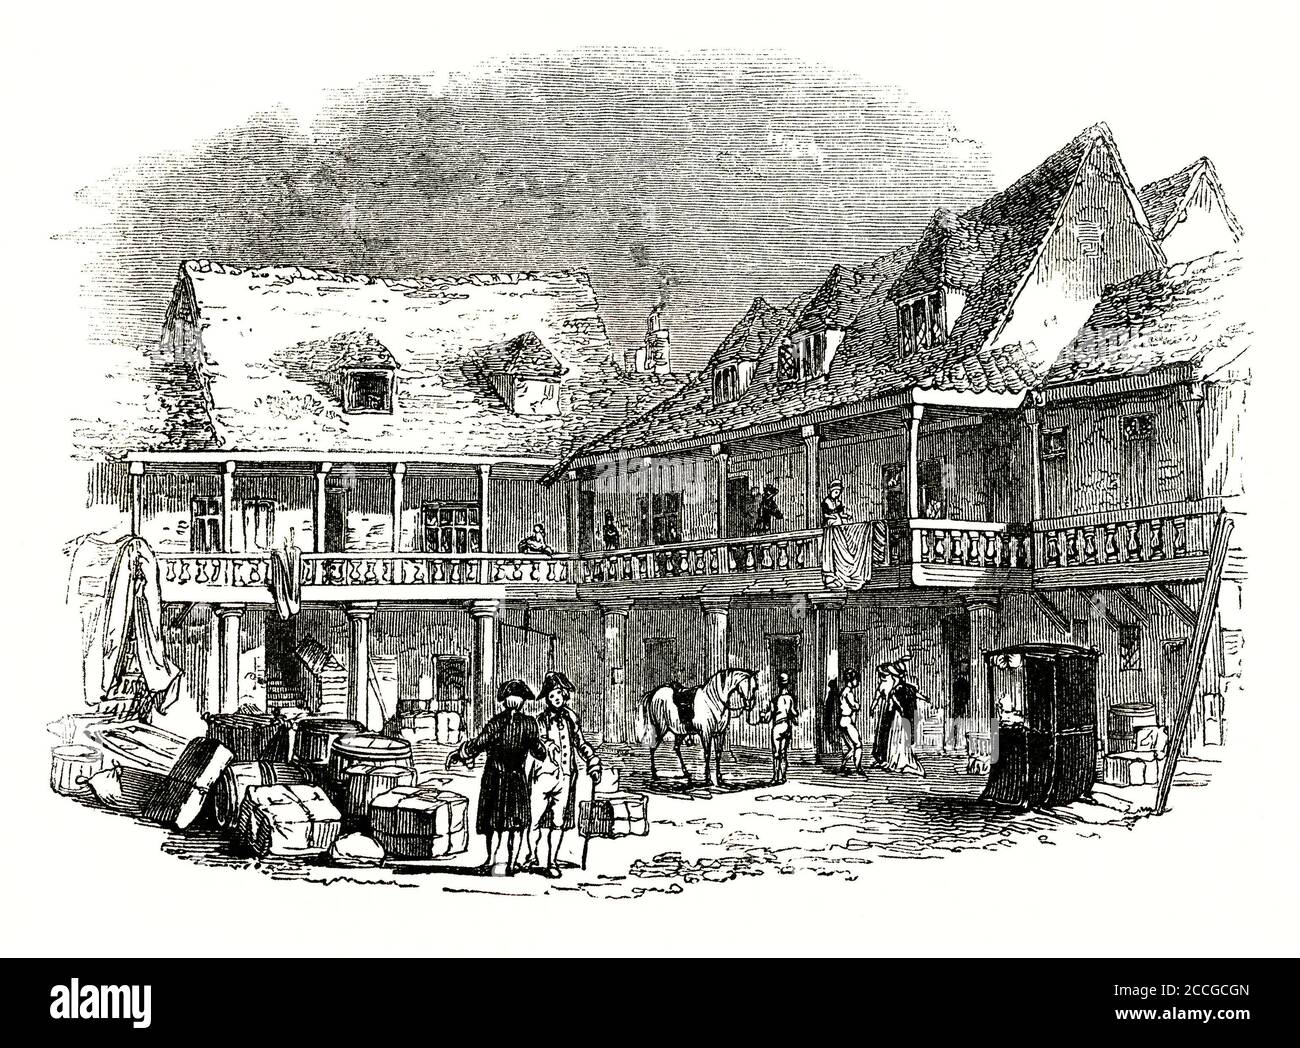 An old engraving of the courtyard of 'The Tabard' (or ‘Talbot’) in the late 1700s. Bedding is aired upstairs. Luggage lies in the courtyard. The inn stood in Borough High St, Southwark, London, England, UK. It was established in 1307 and was on the coach route south from London. The Tabard accommodated people who made the pilgrimage to Canterbury Cathedral (Chaucer mentions it in 'The Canterbury Tales'). In 1676 fire destroyed the inn. It was rebuilt and renamed The Talbot. It profited from the growth in stagecoach traffic between London and the channel ports. It was demolished in 1873. Stock Photo